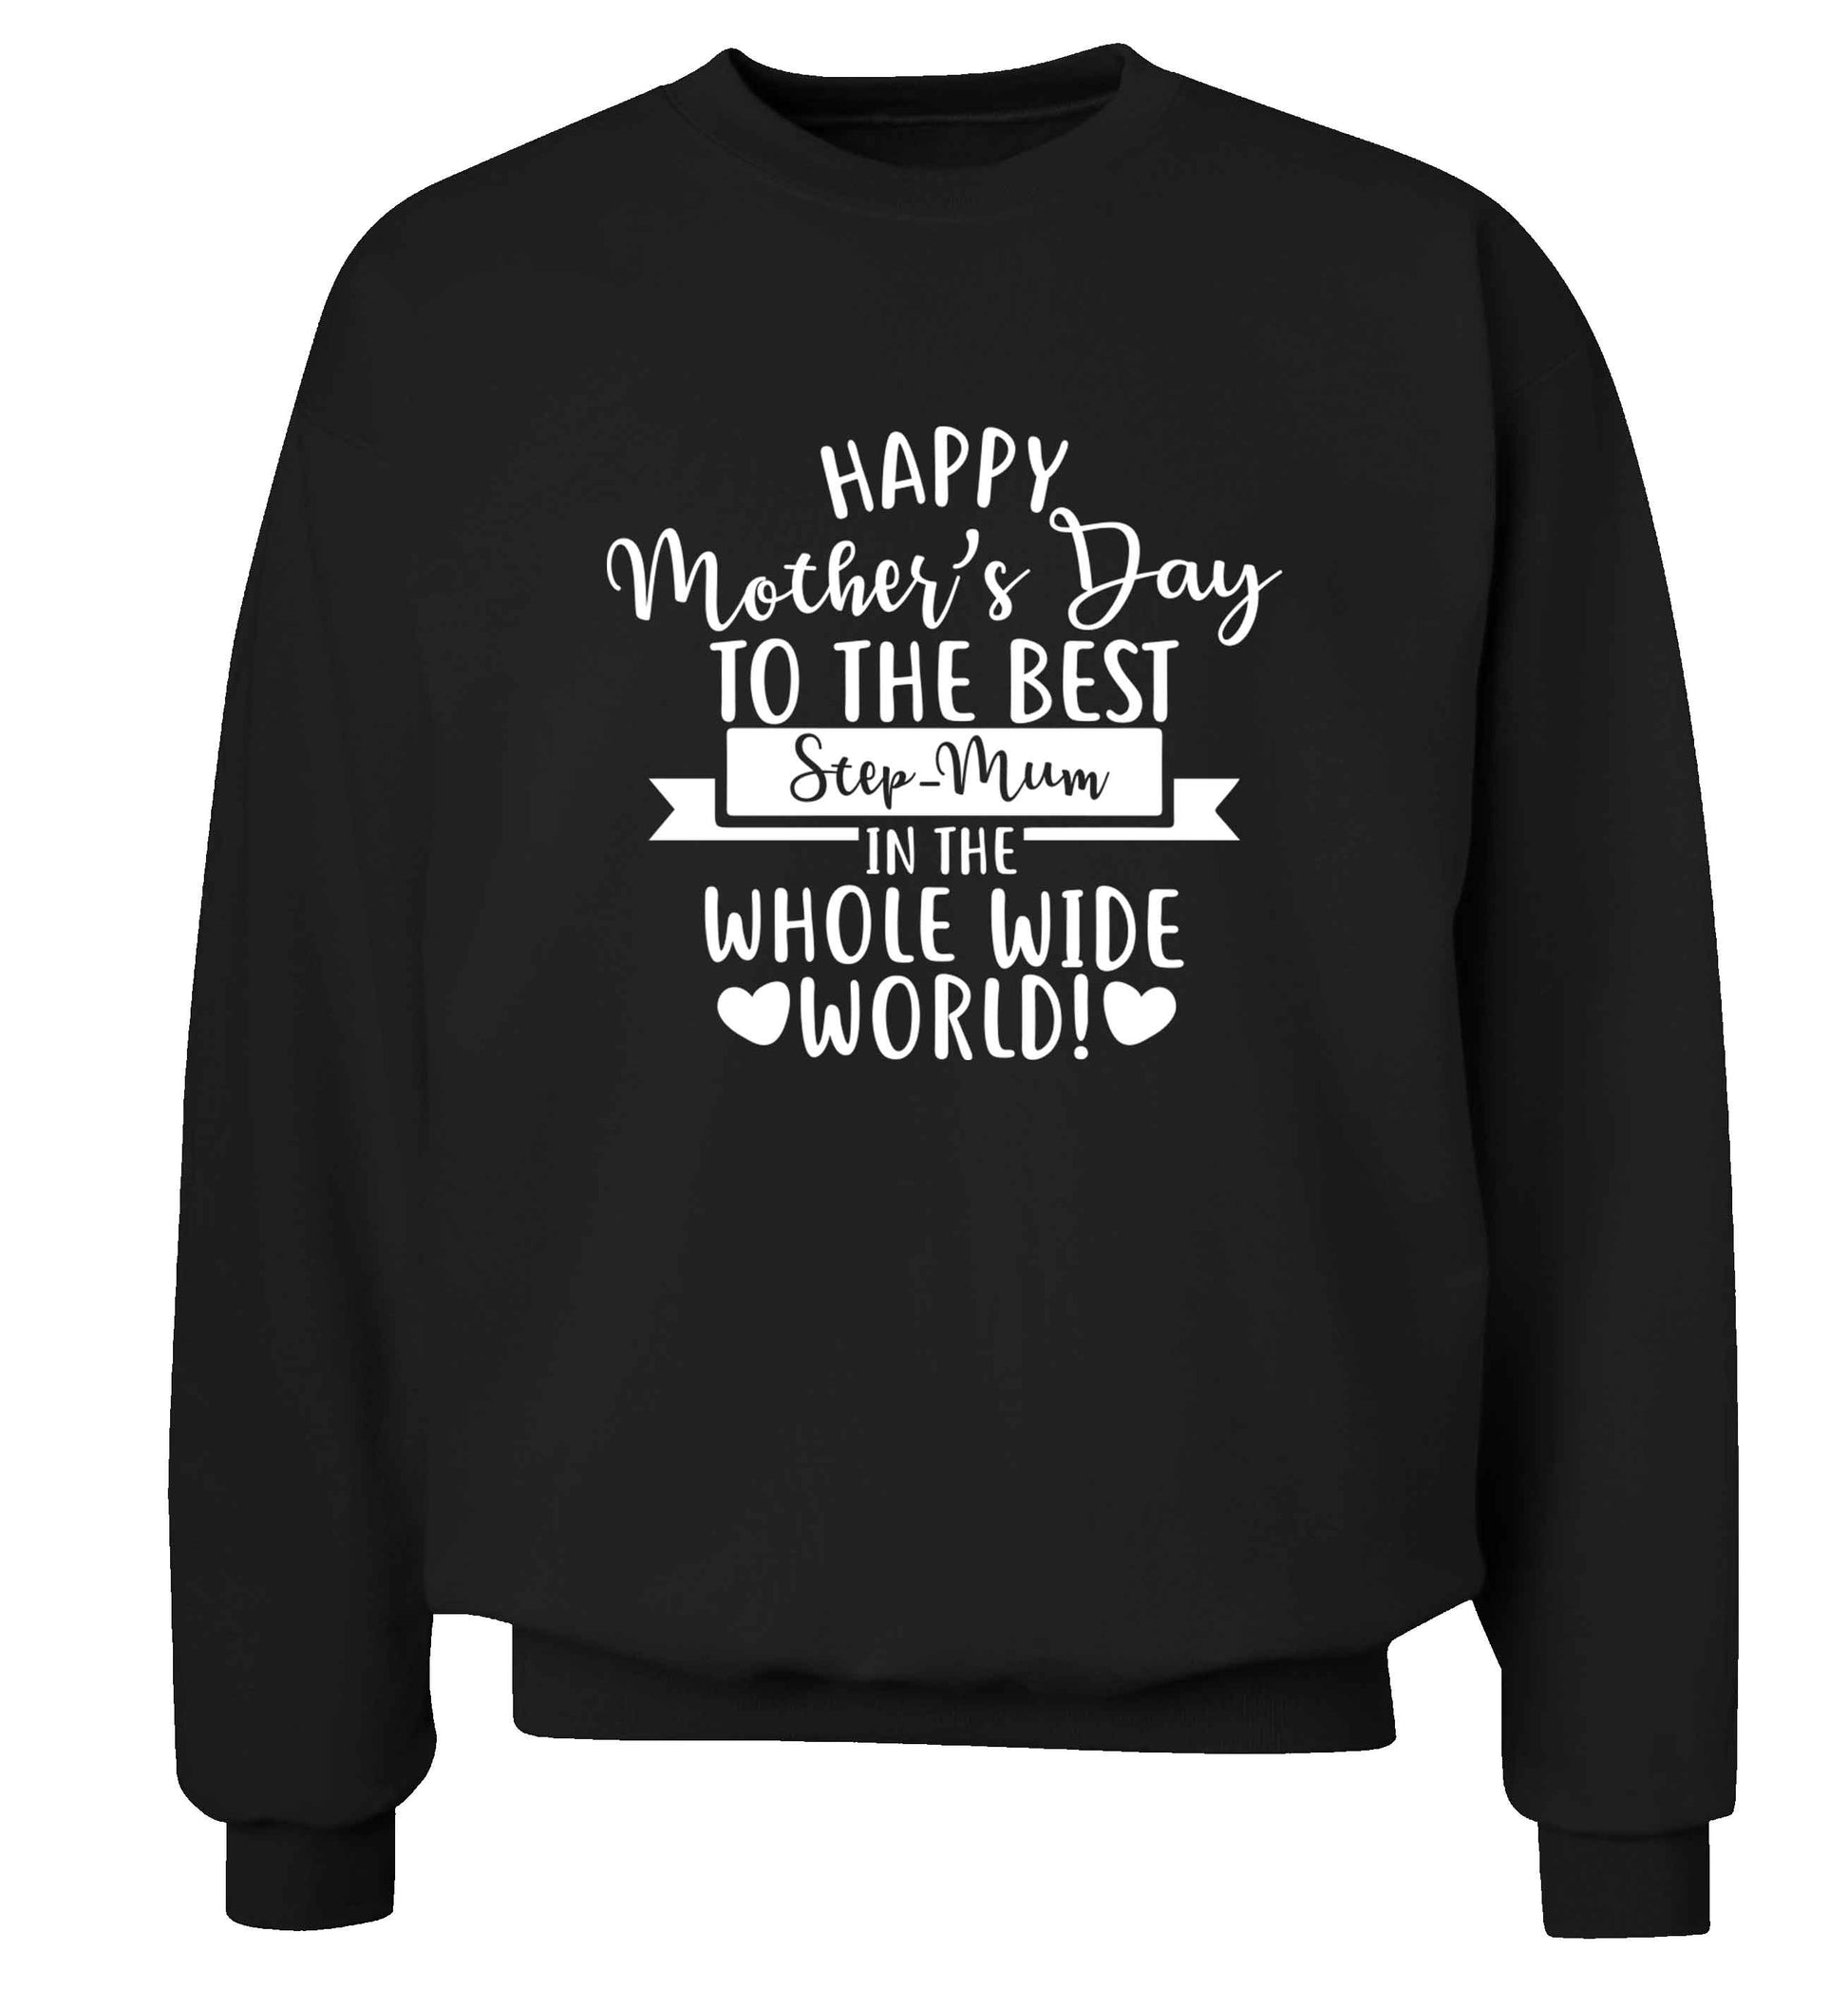 Happy mother's day to the best step-mum in the world adult's unisex black sweater 2XL